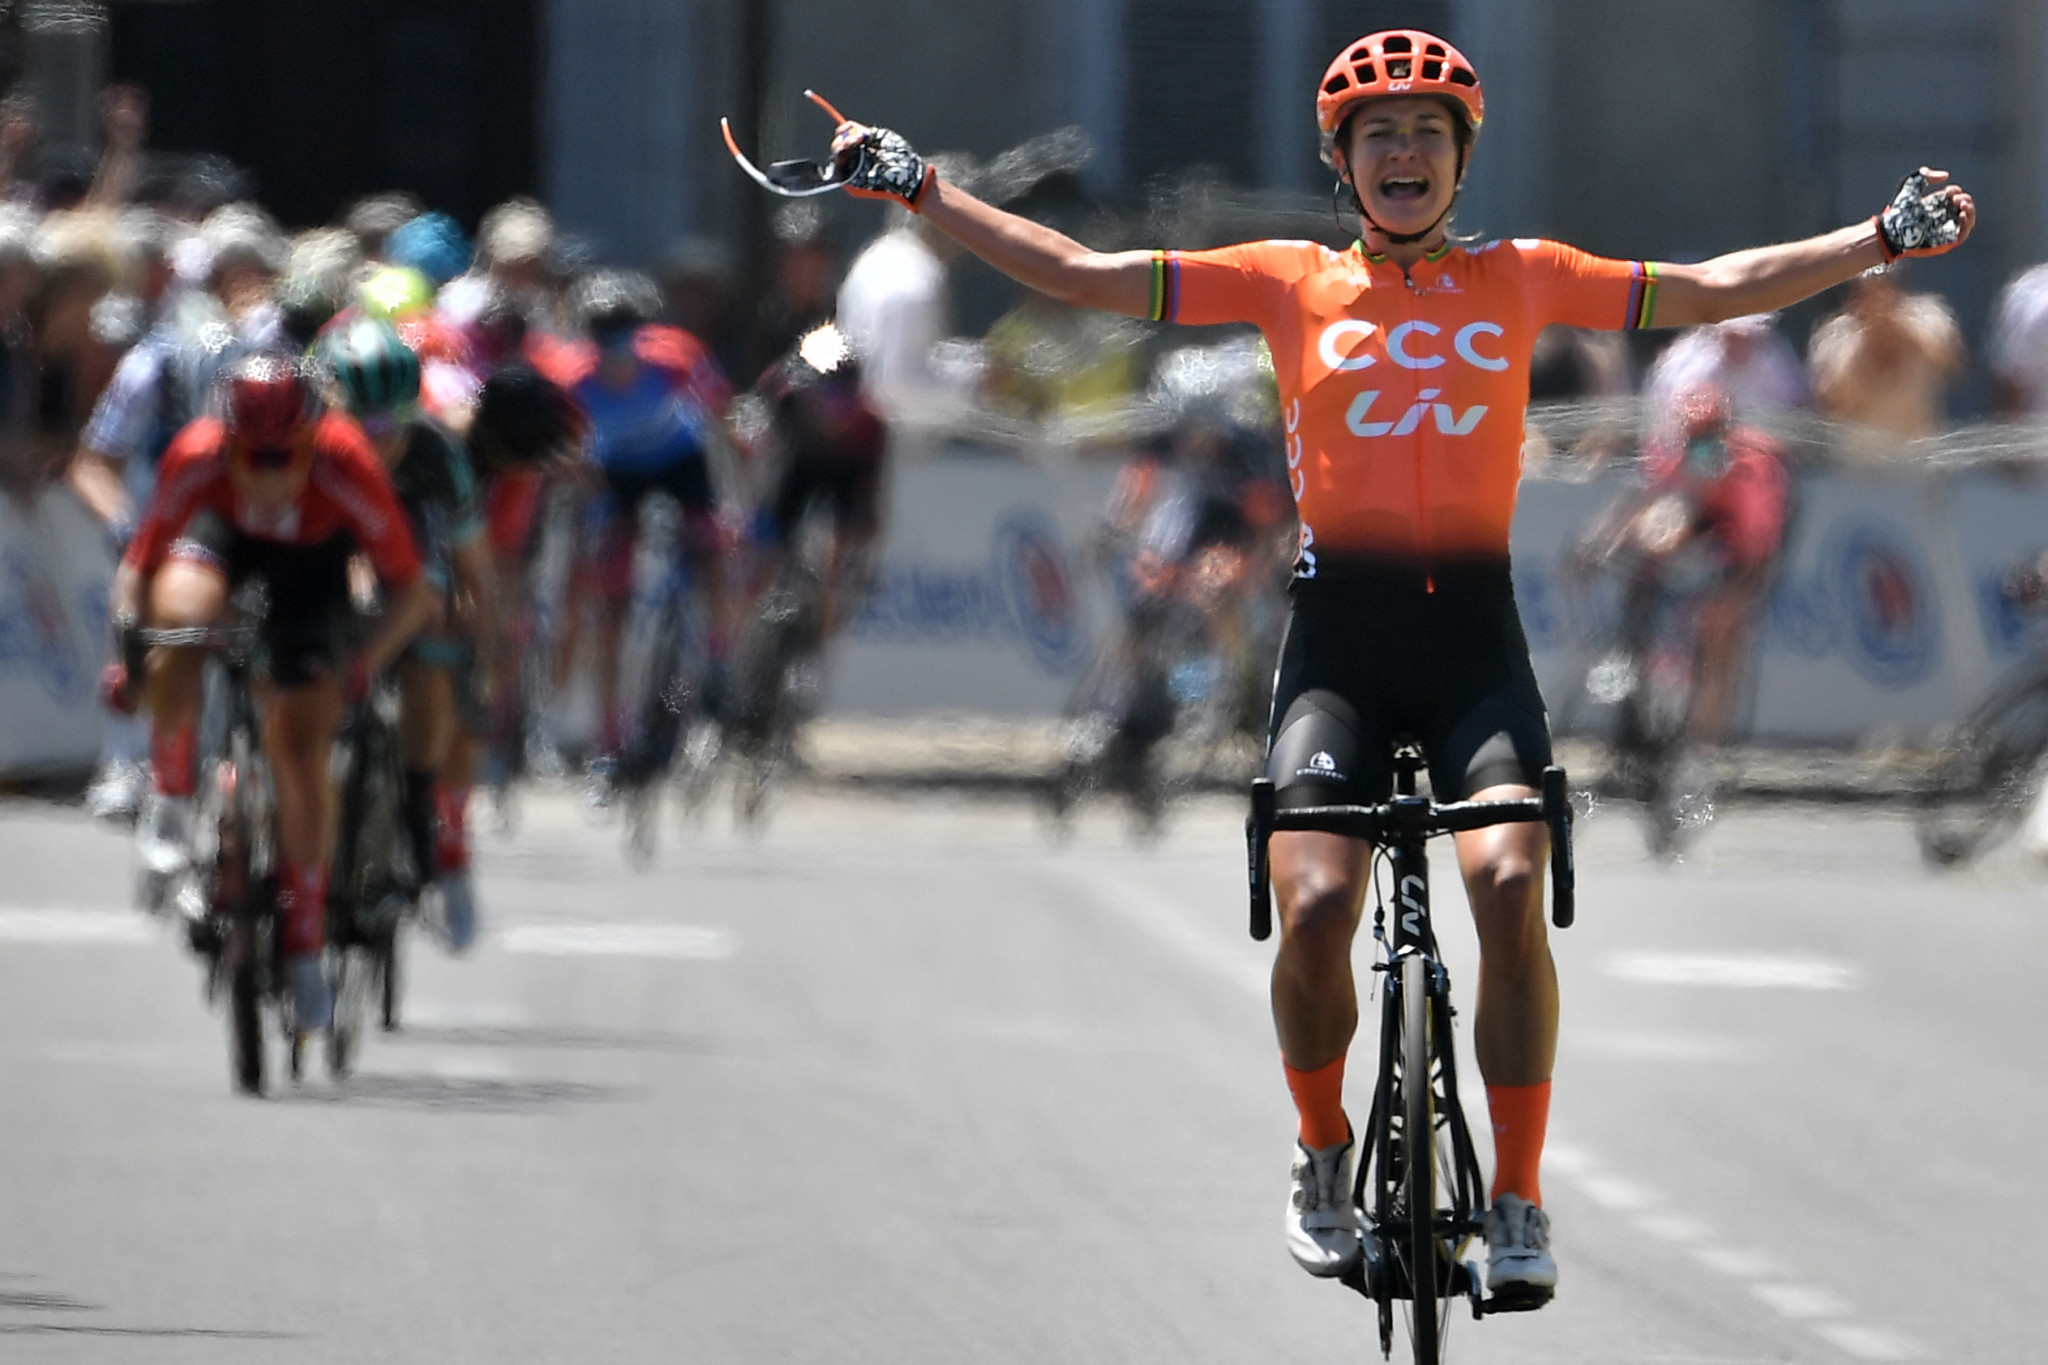 Vos claims second La Course title with late surge